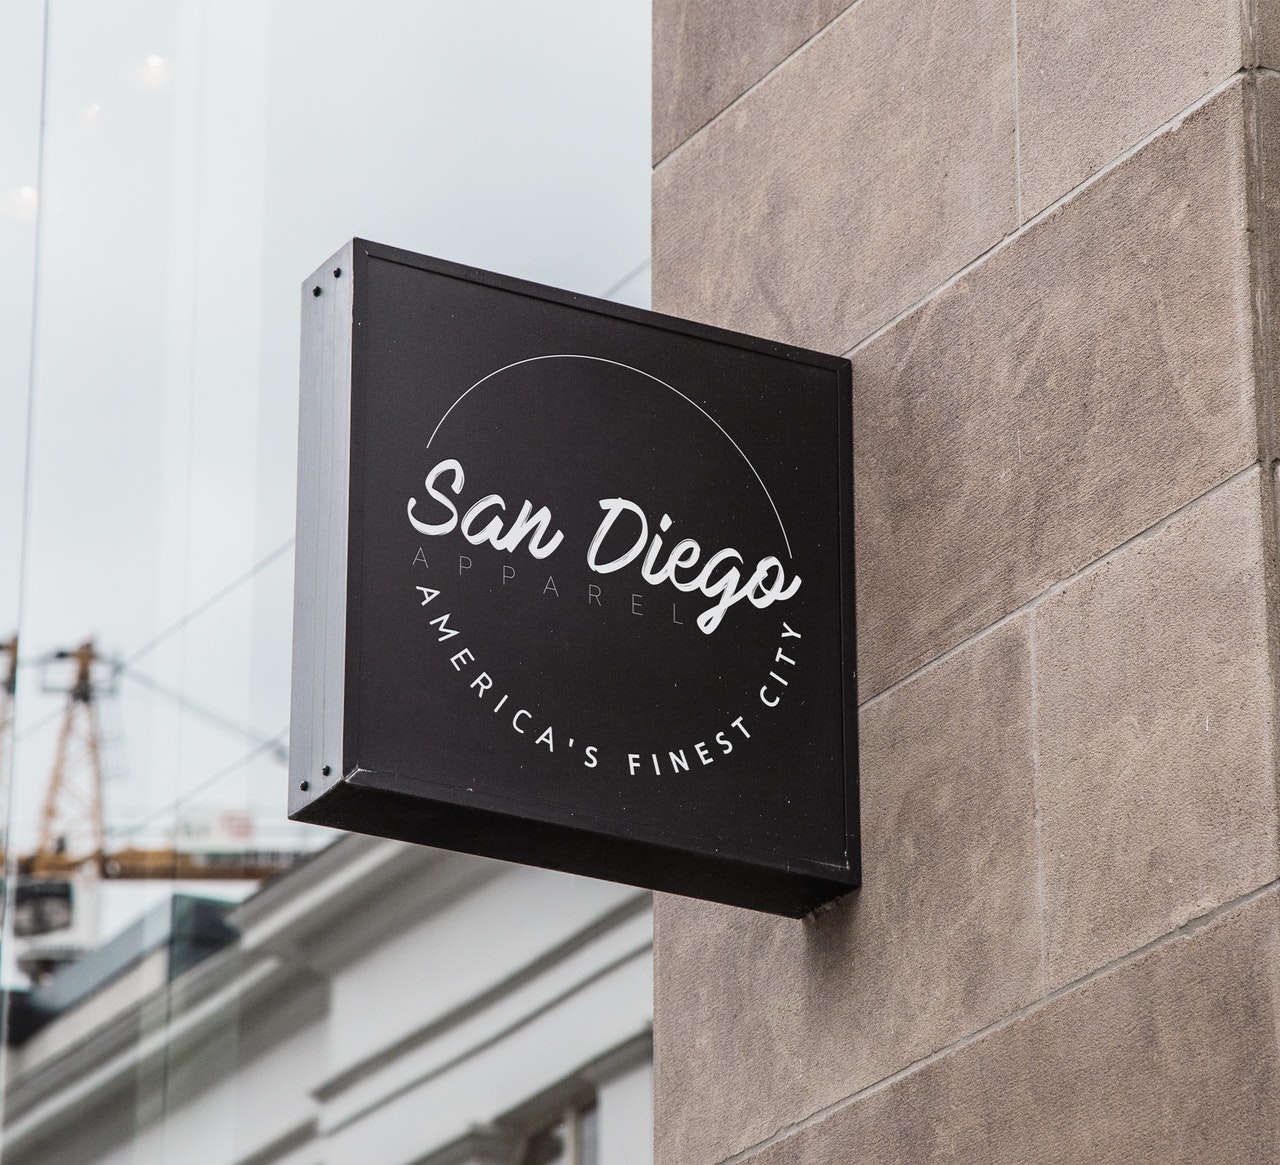 Store sign saying San Diego - Americas Finest City - photo taken by Stephen Niemeier from Pexels